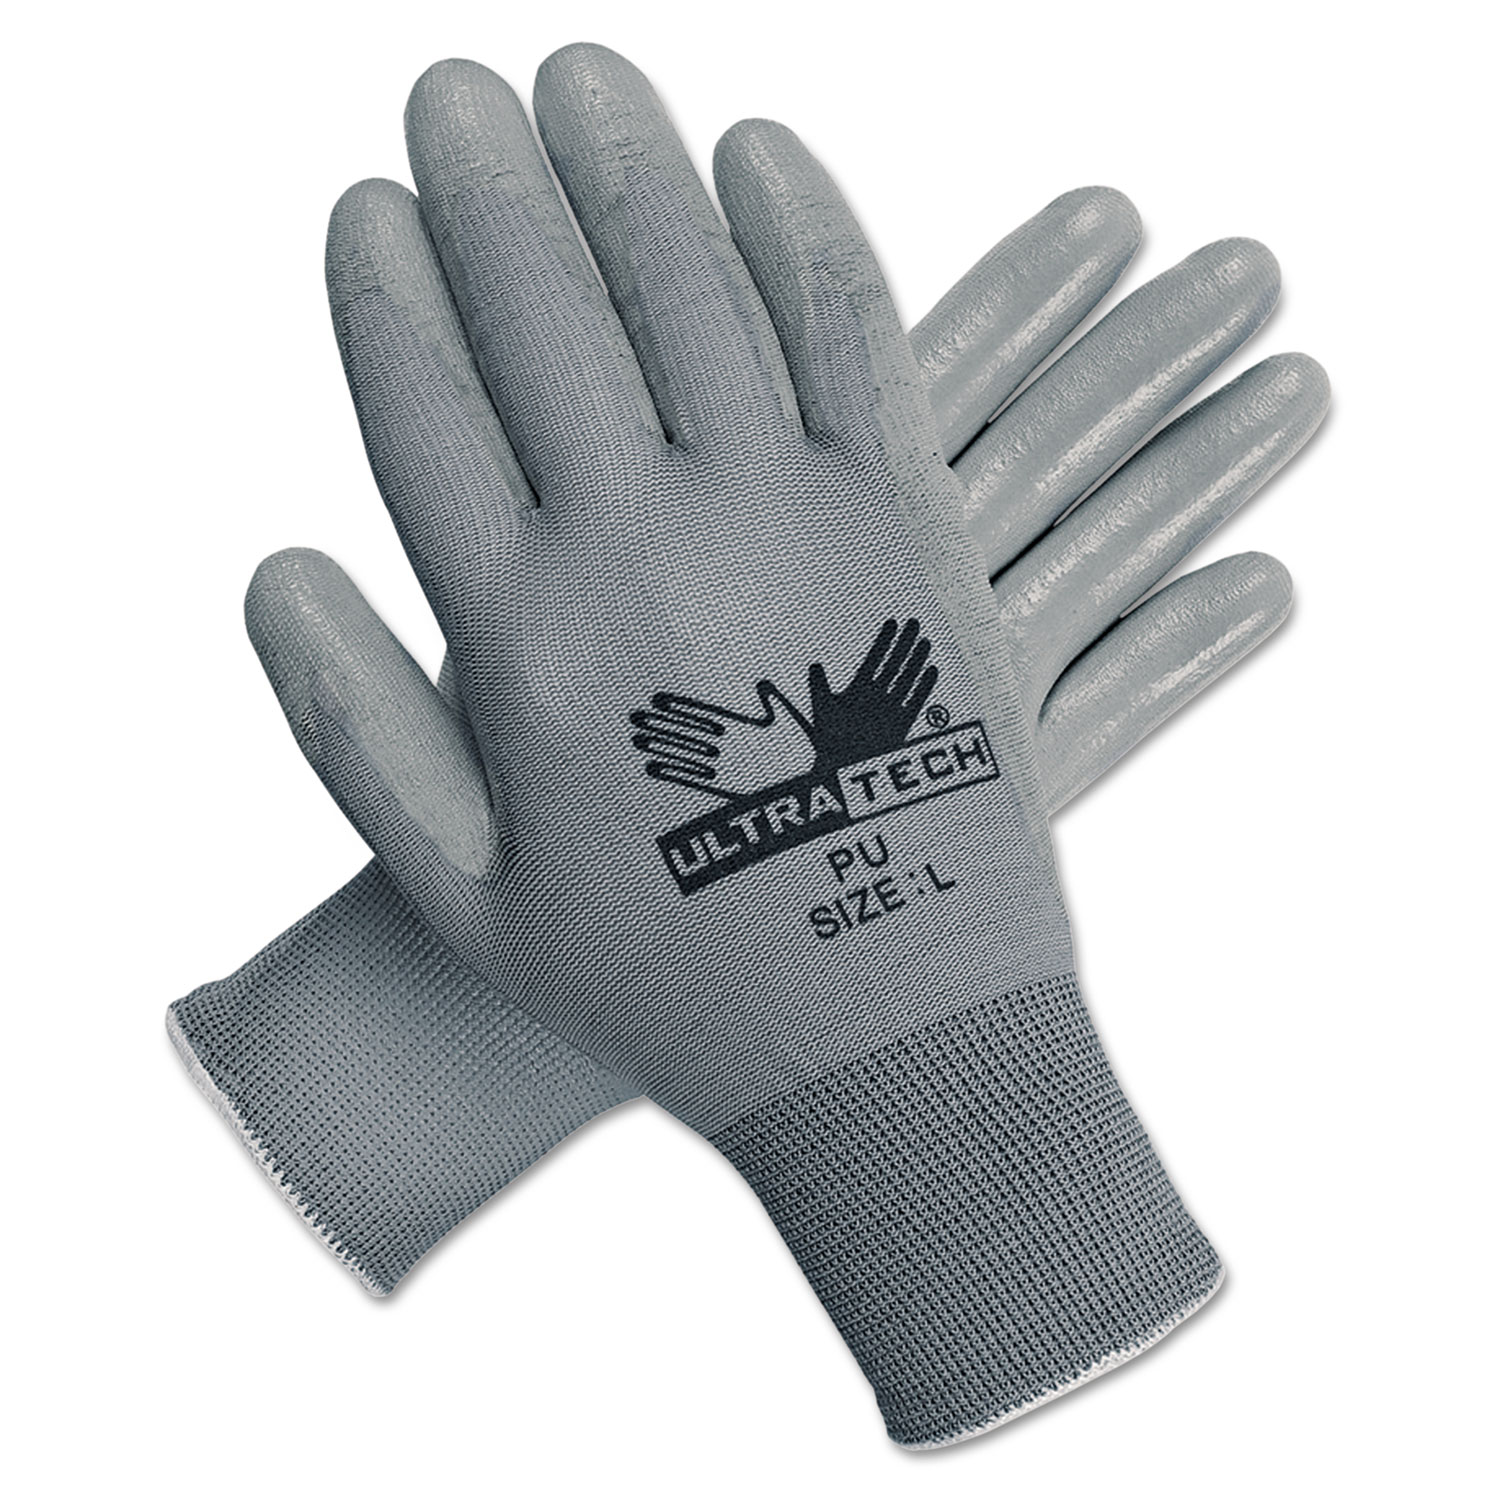  MCR Safety 9696L Ultra Tech Tactile Dexterity Work Gloves, White/Gray, Large, 12 Pairs (MPG9696L) 